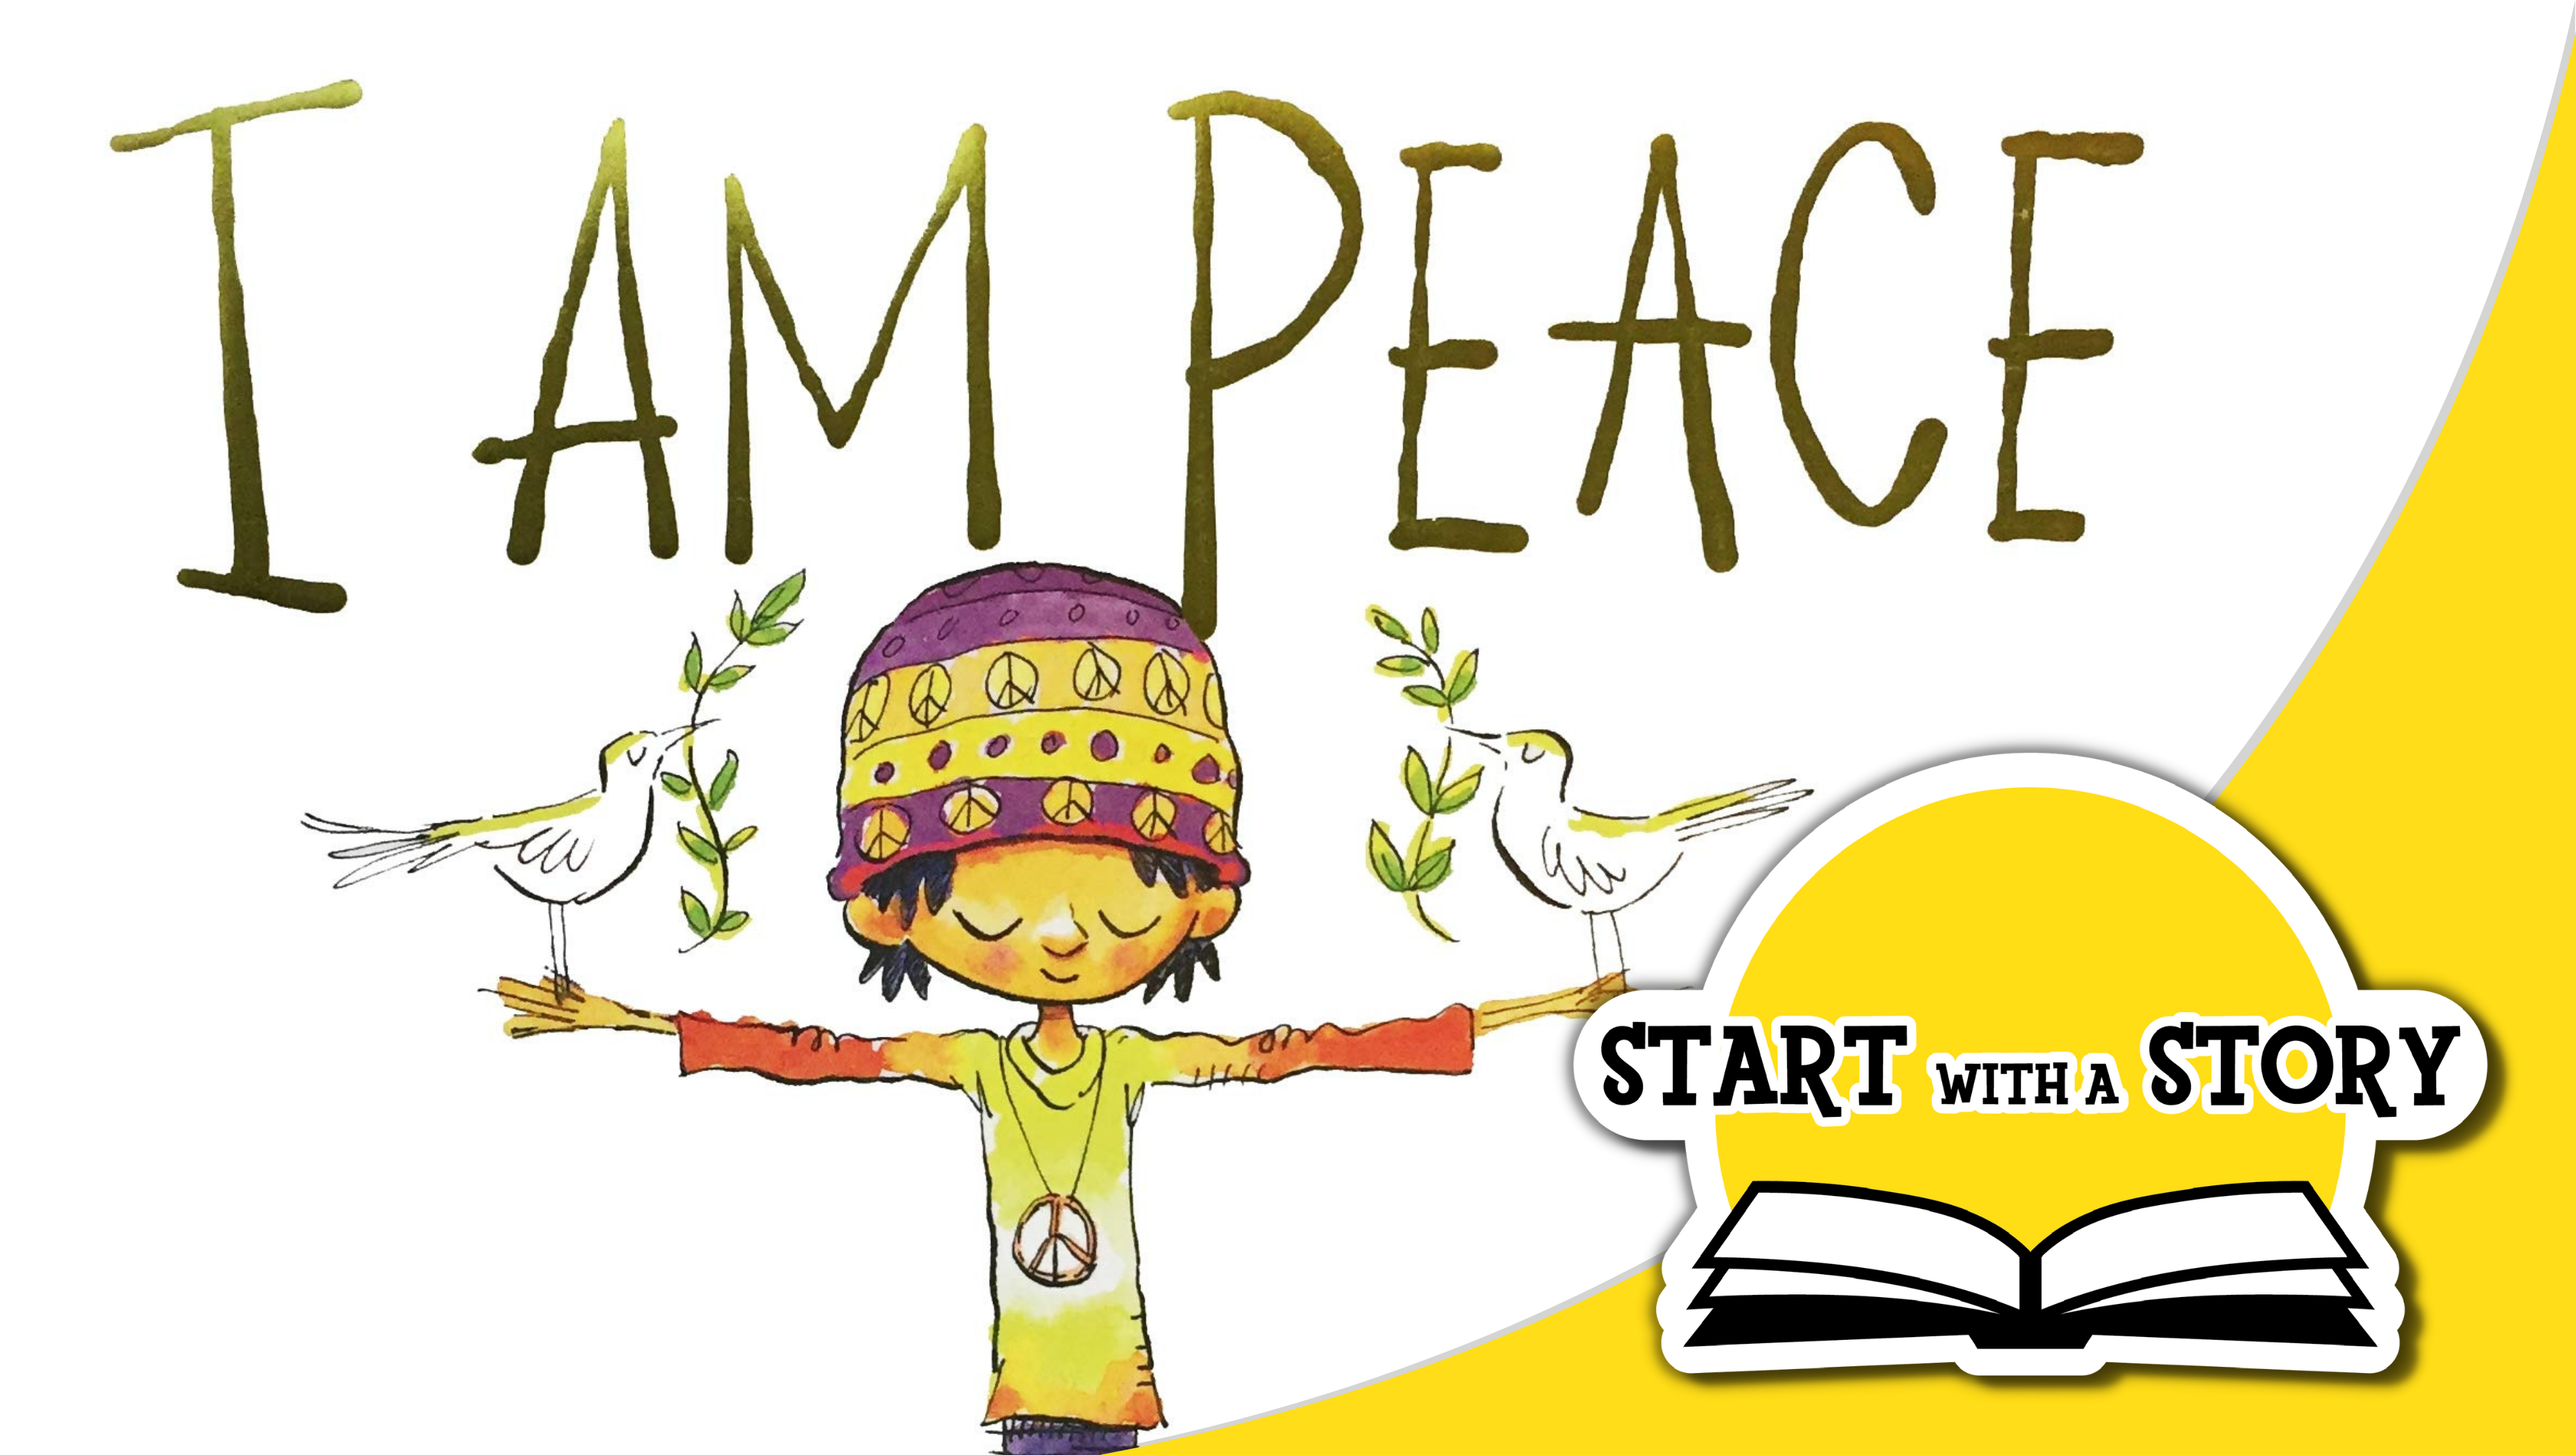 Start with a Story I Am Peace Overview